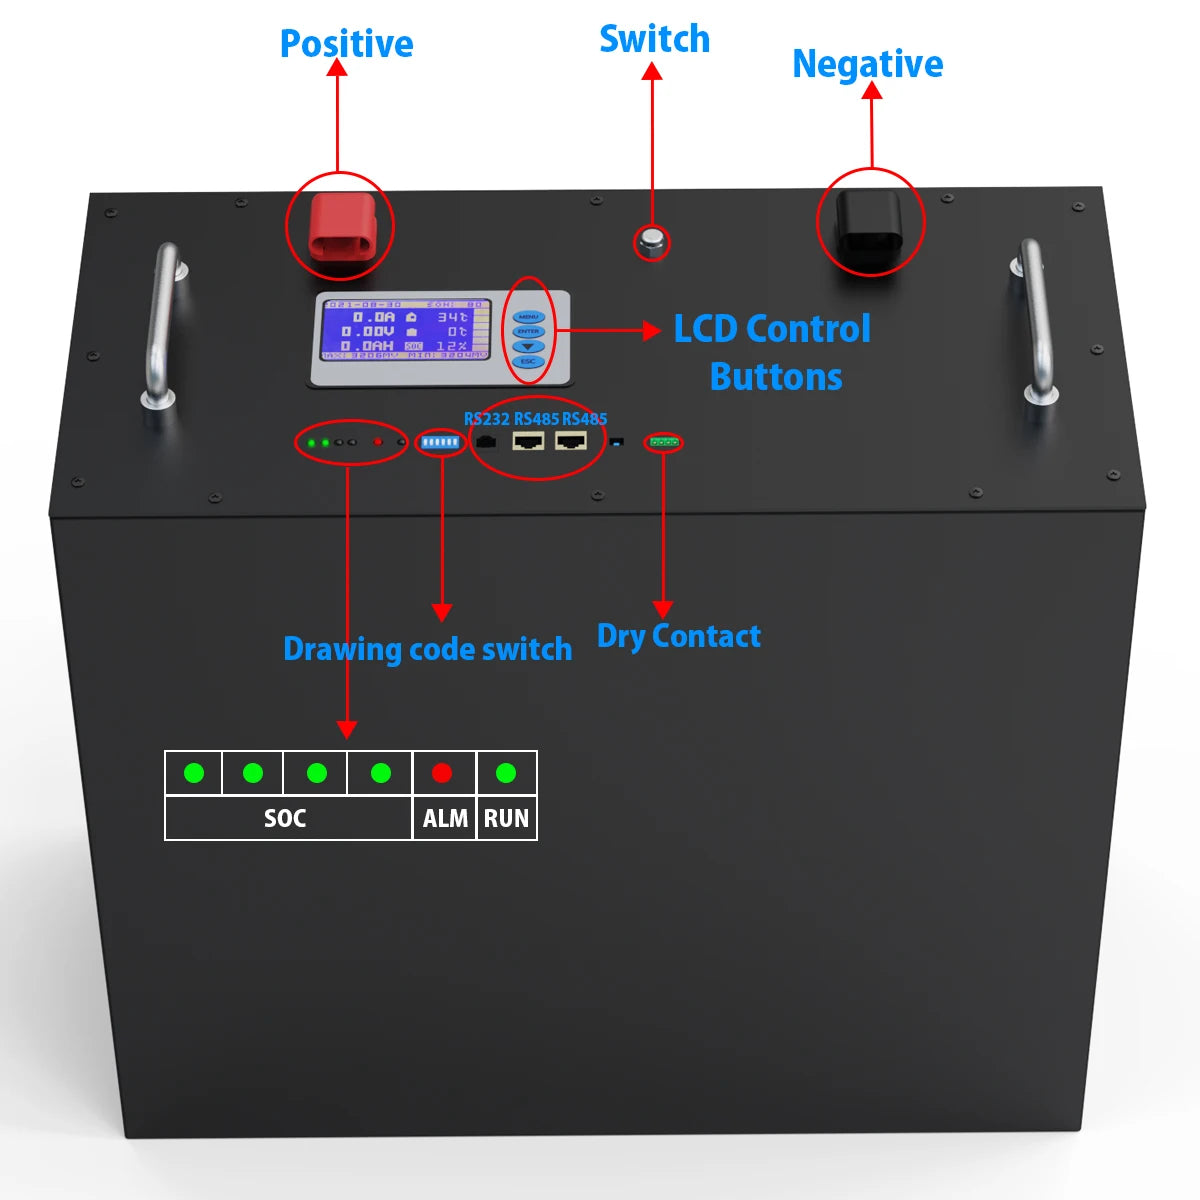 6000 Cycles 48V 170Ah 8704Wh LiFePO4 Battery, LCD Display with Communication Protocols and Indicators for Battery Monitoring